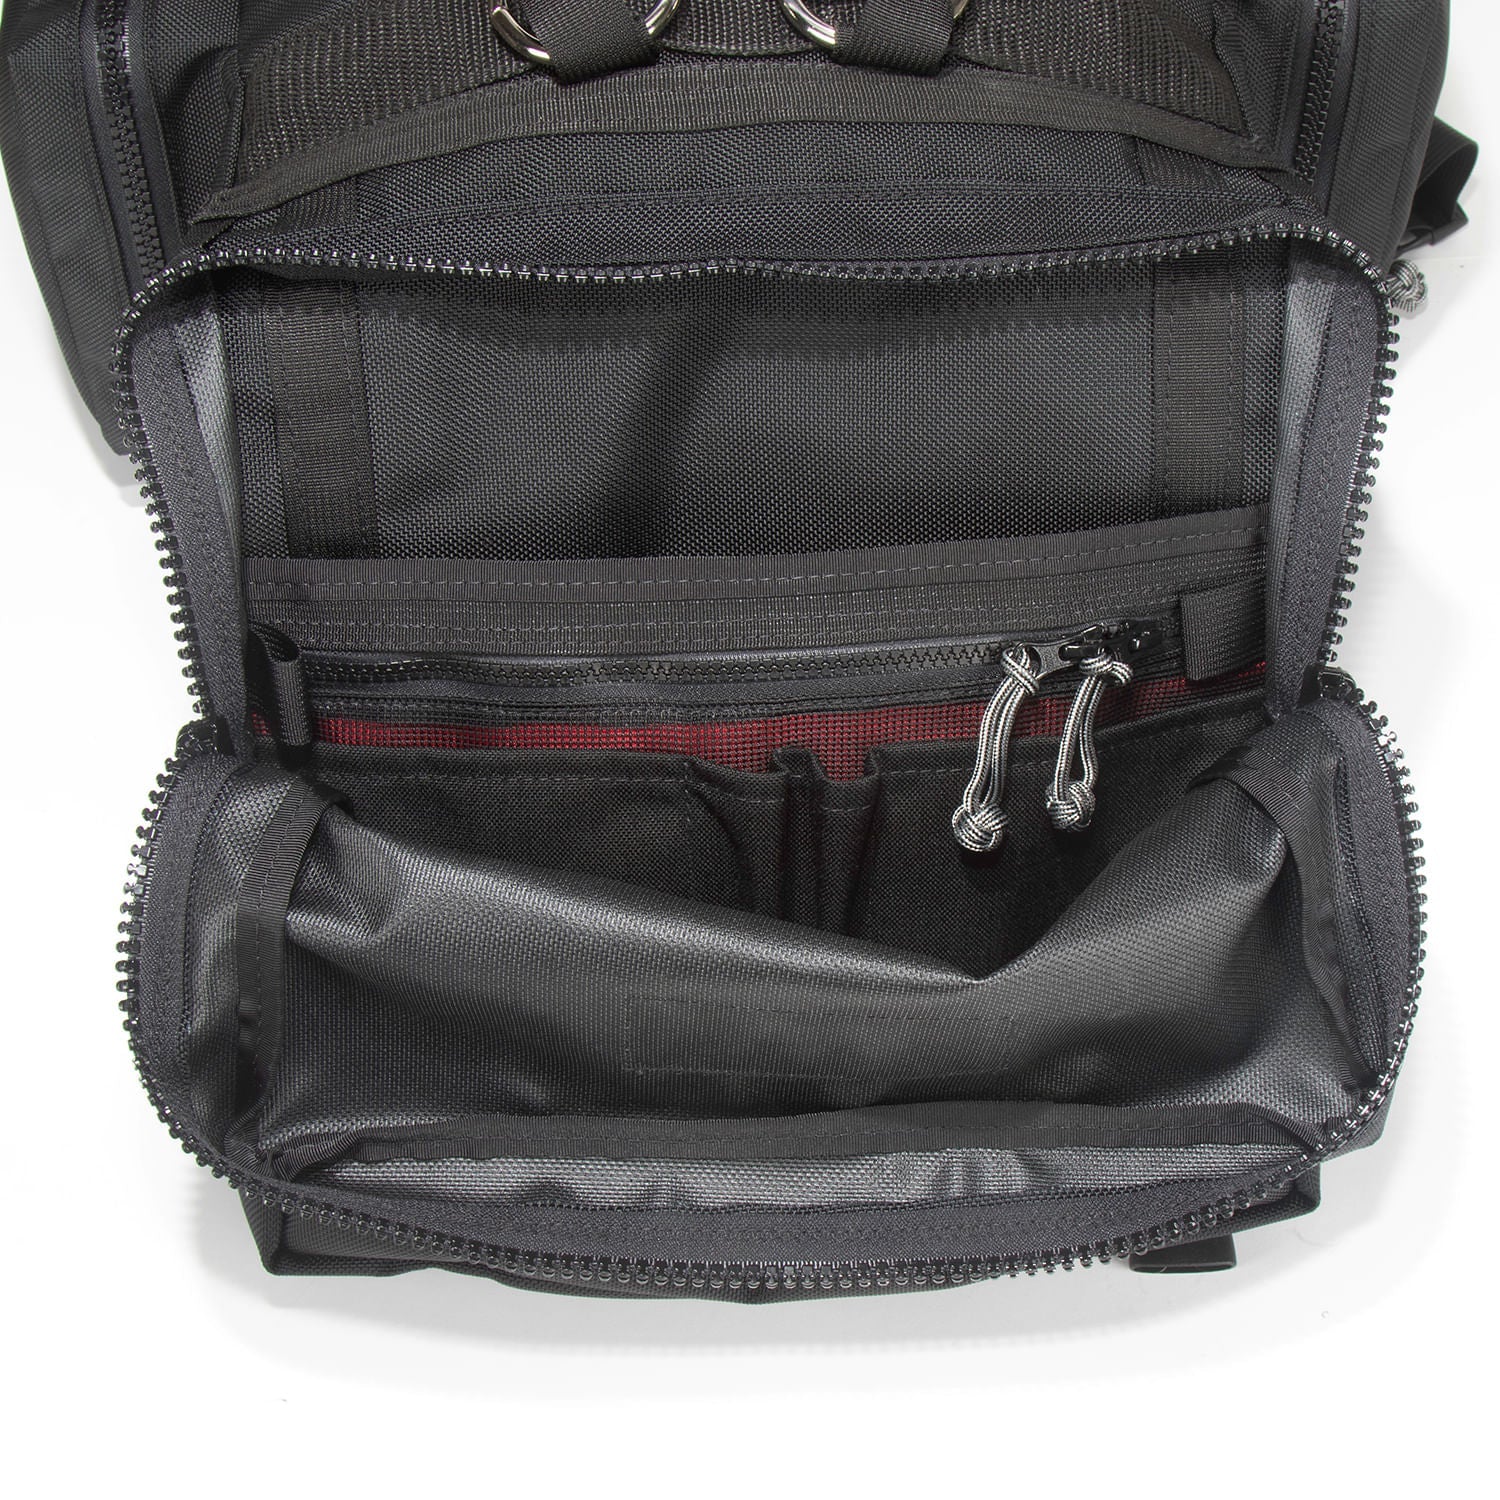 Inside view of outer pocket with mesh security pocket and pen and pencil holder slots. 